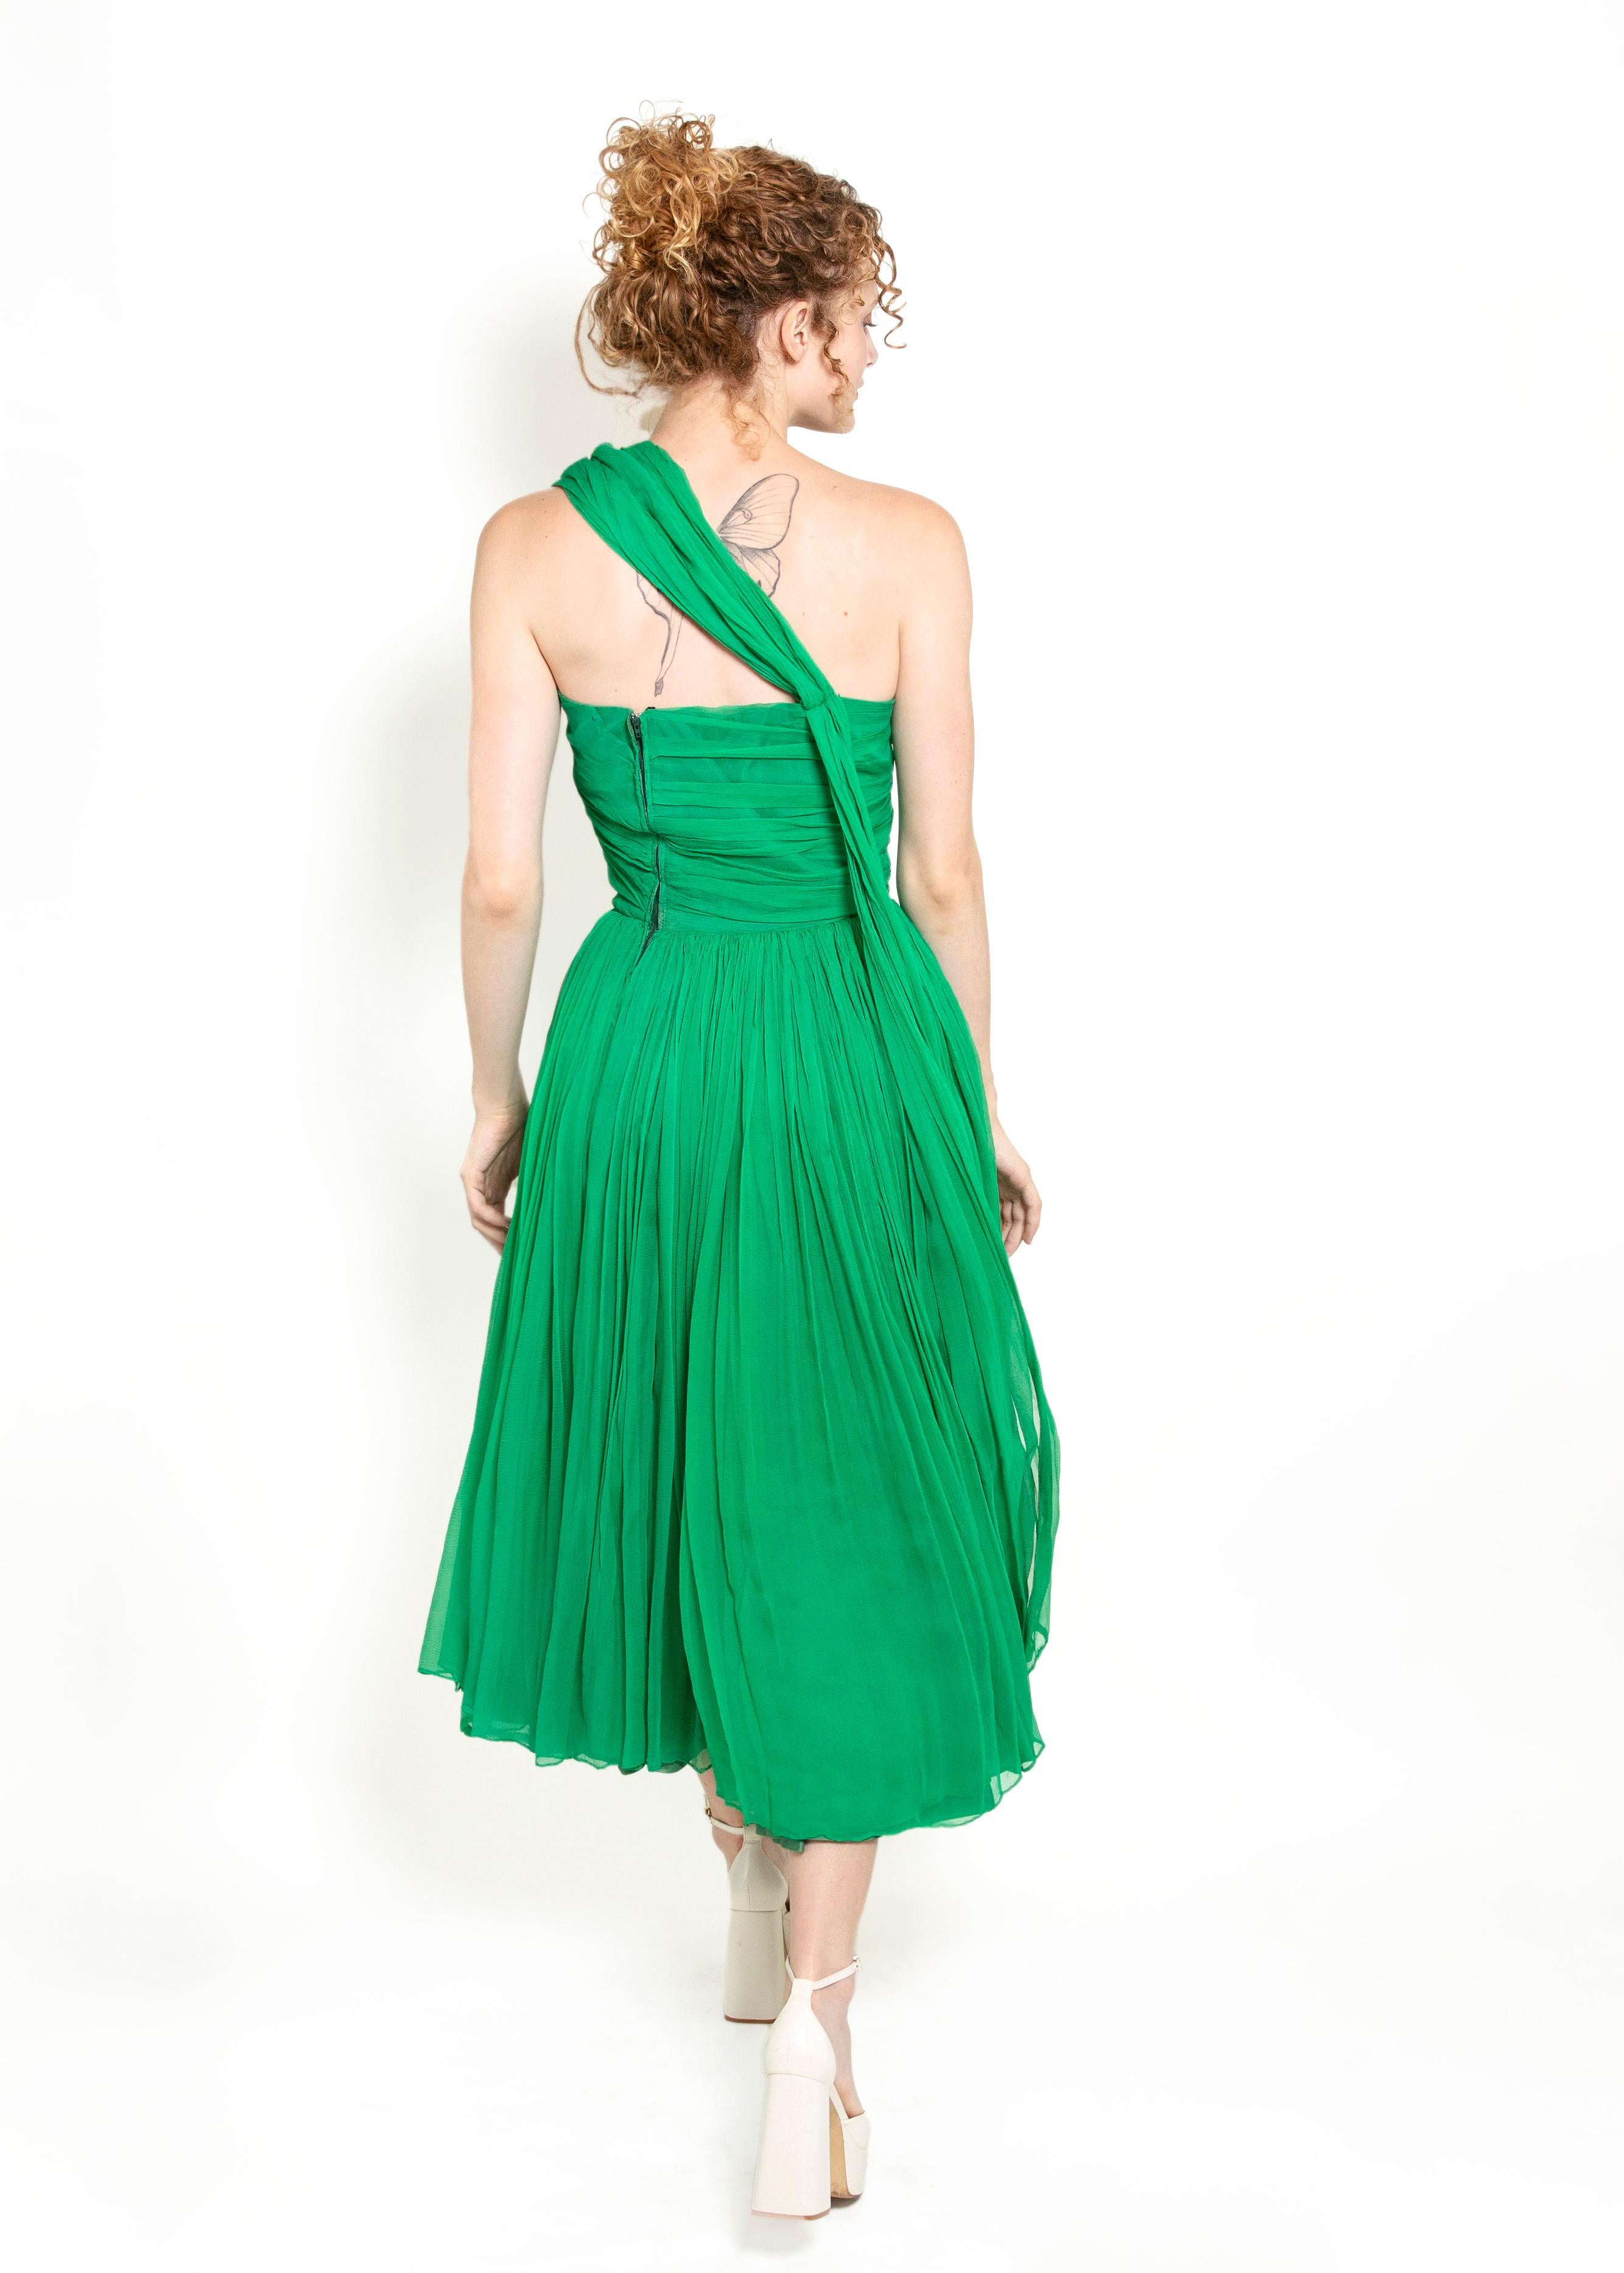 This stunning 1950's Vintage Kelly Green Silk Chiffon Cocktail Dress is the perfect way to turn heads at any special occasion. Luxurious and timeless, its silk chiffon fabric creates a draping effect, while the faux shawl completes the vintage look.